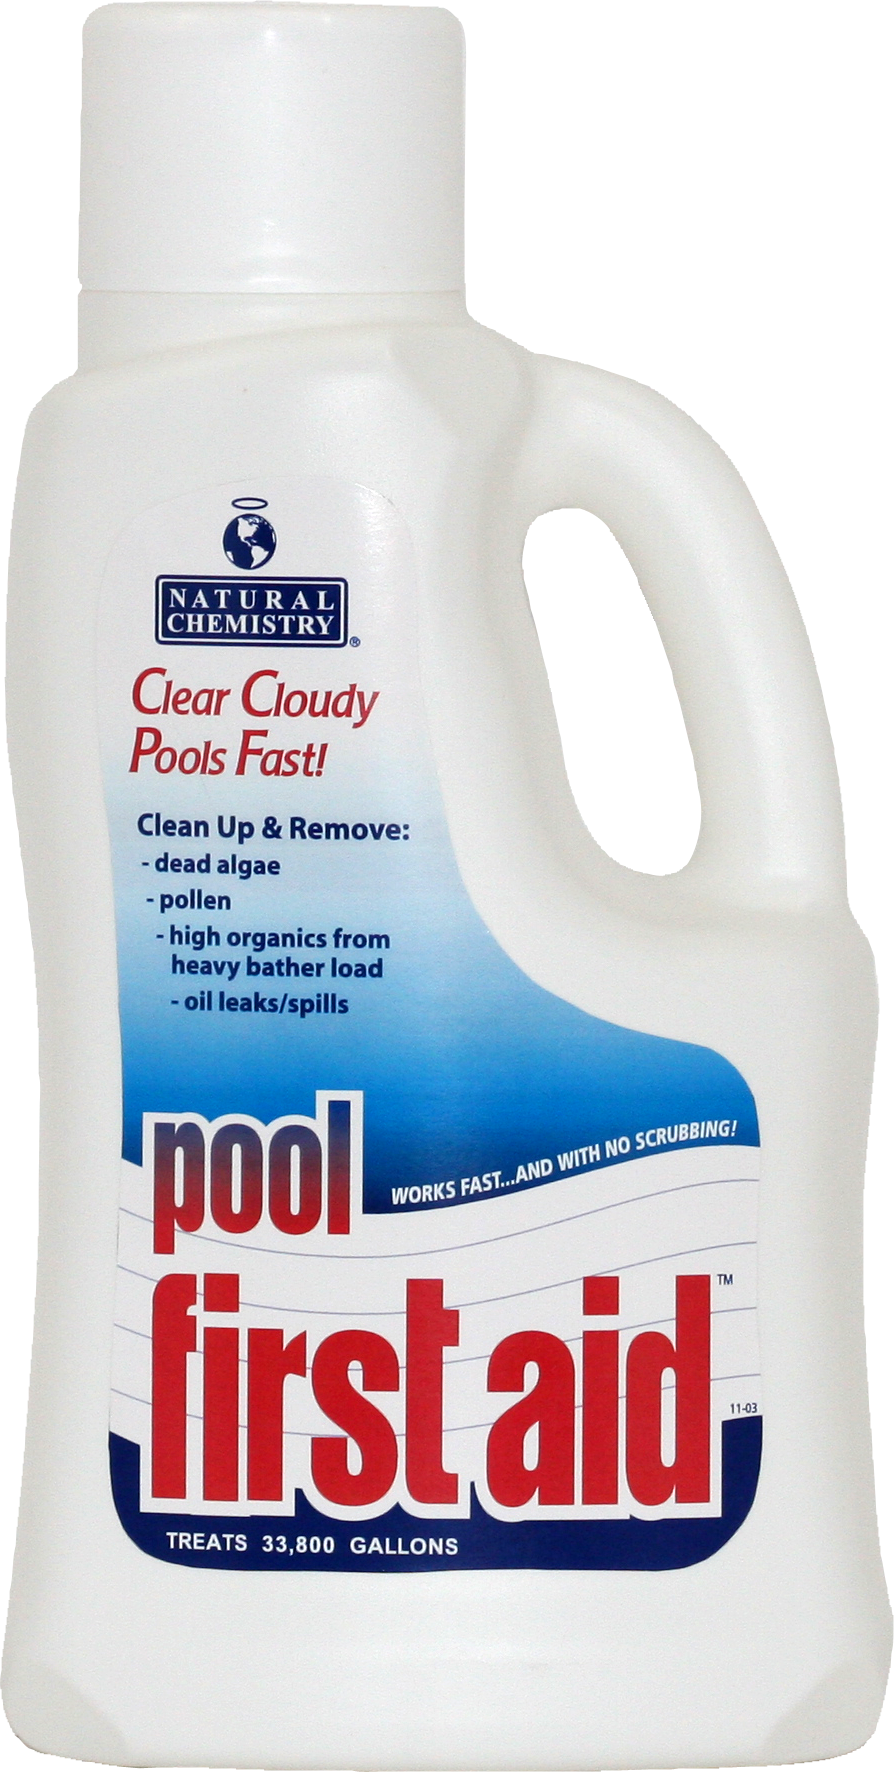 PoolFirstAid 2L - Pool First Aid - 2L